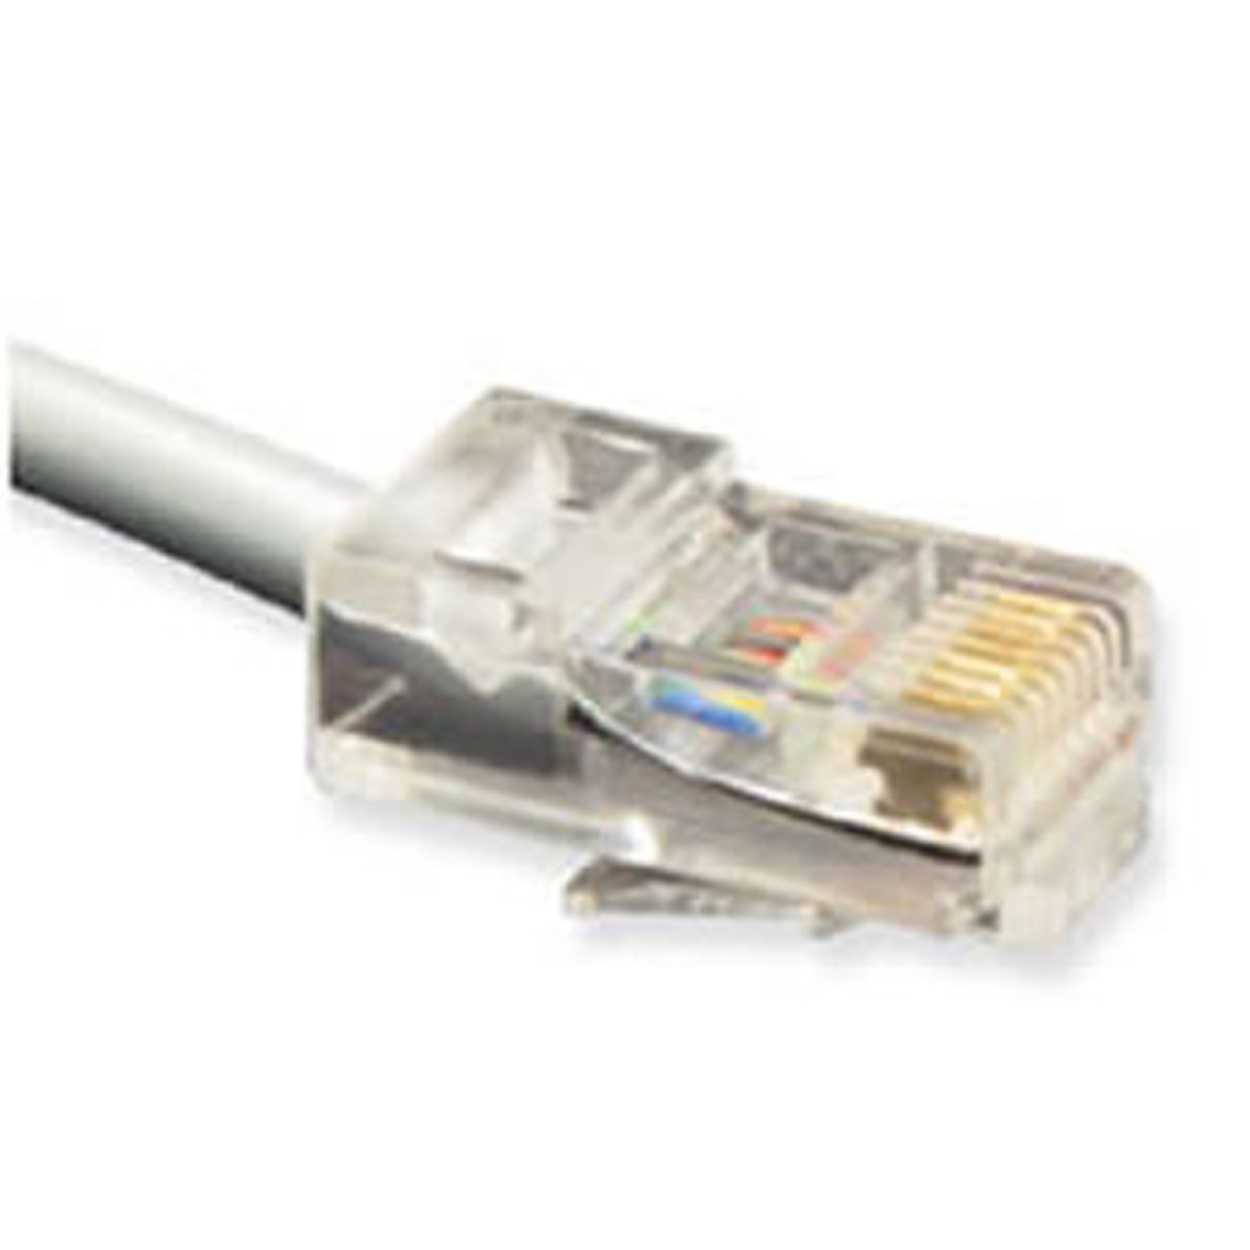 Cablesys-ICCICLC807FSV